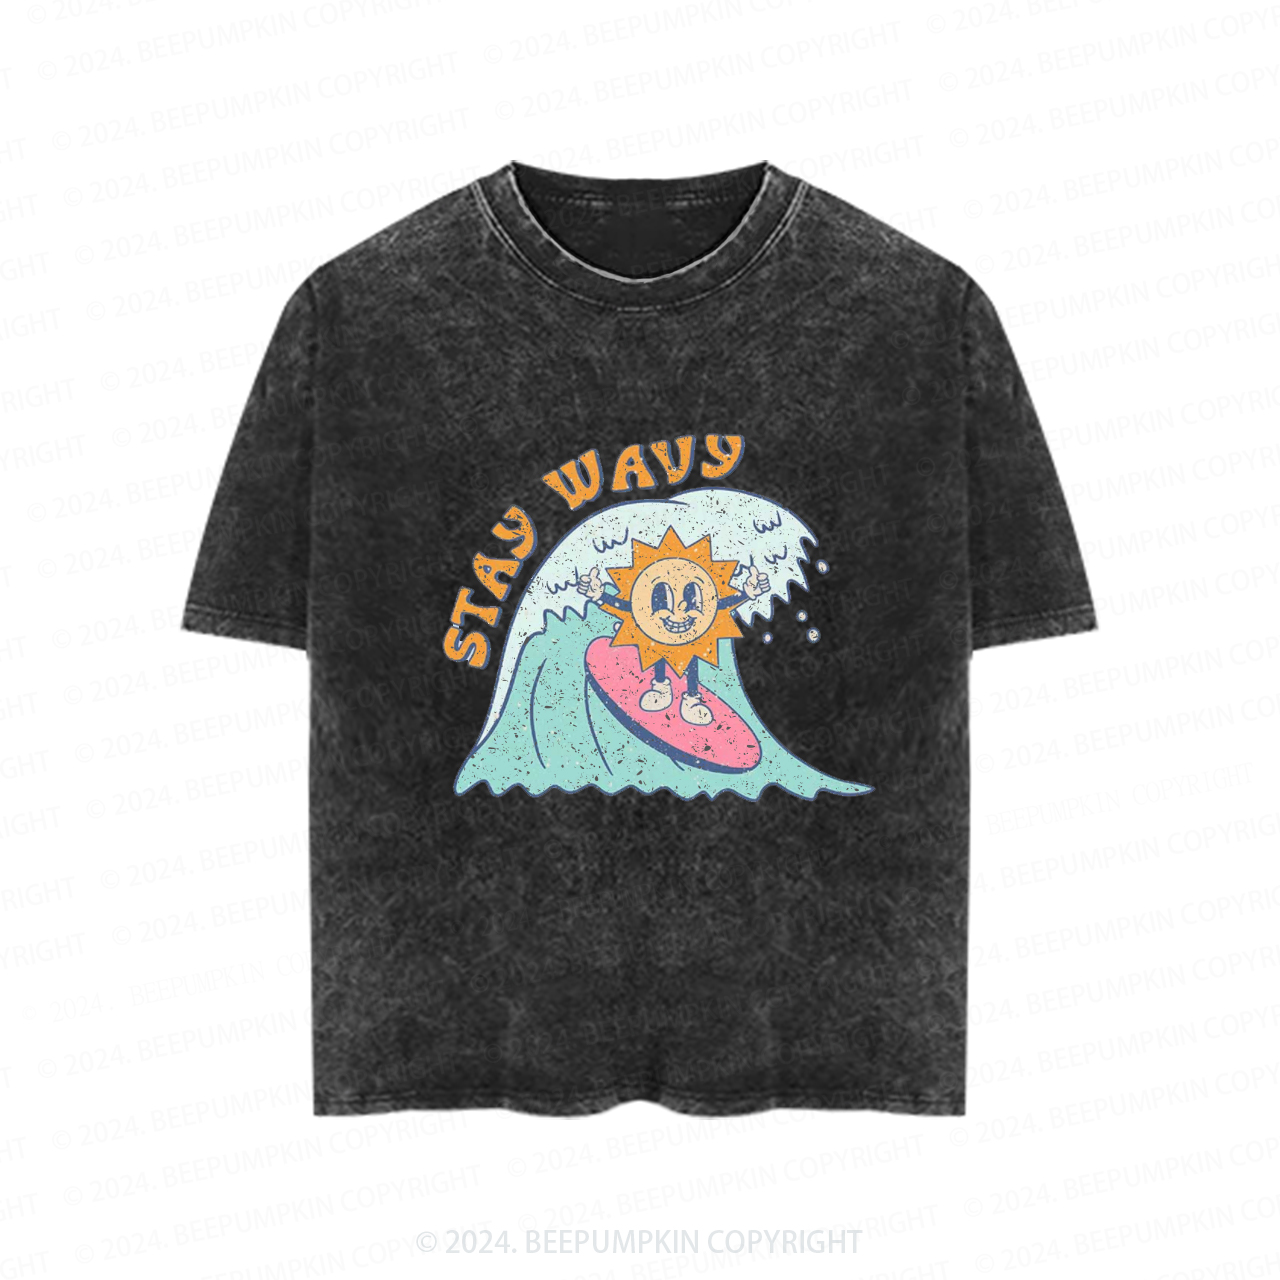 Stay Wavy Toddler&Kids Washed Tees         